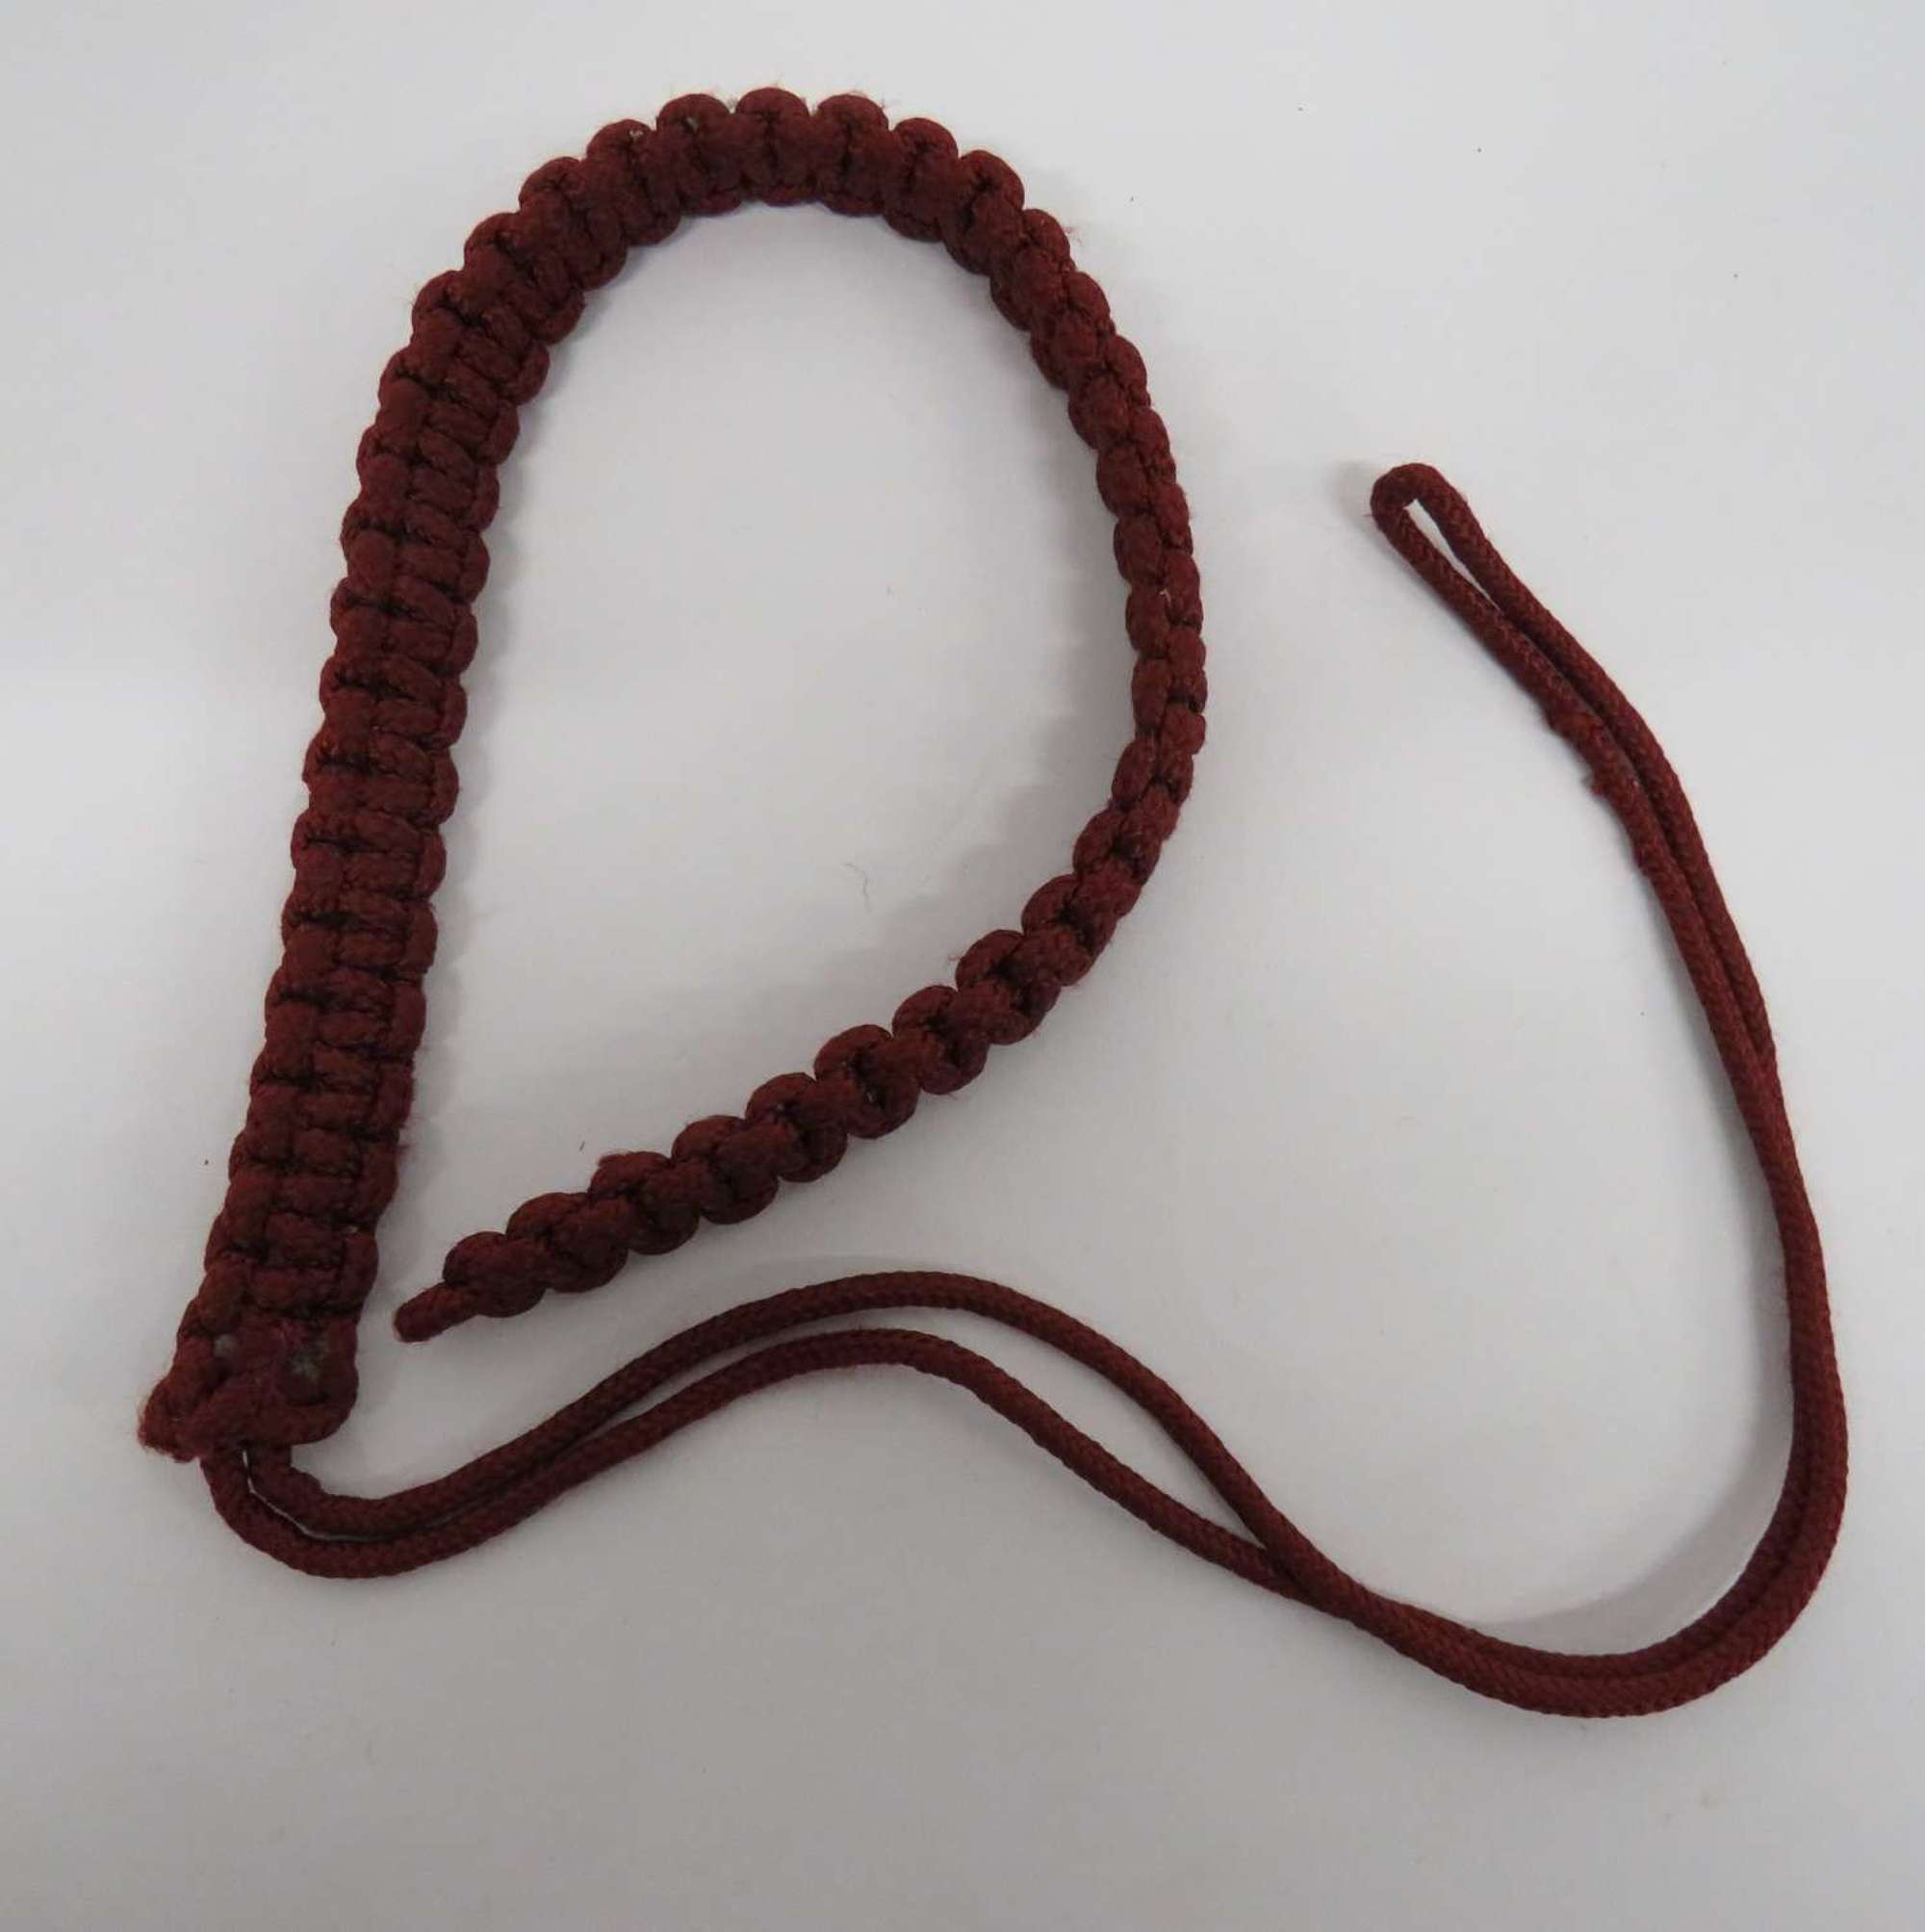 Maroon Lanyard as used by some Parachute Battalions